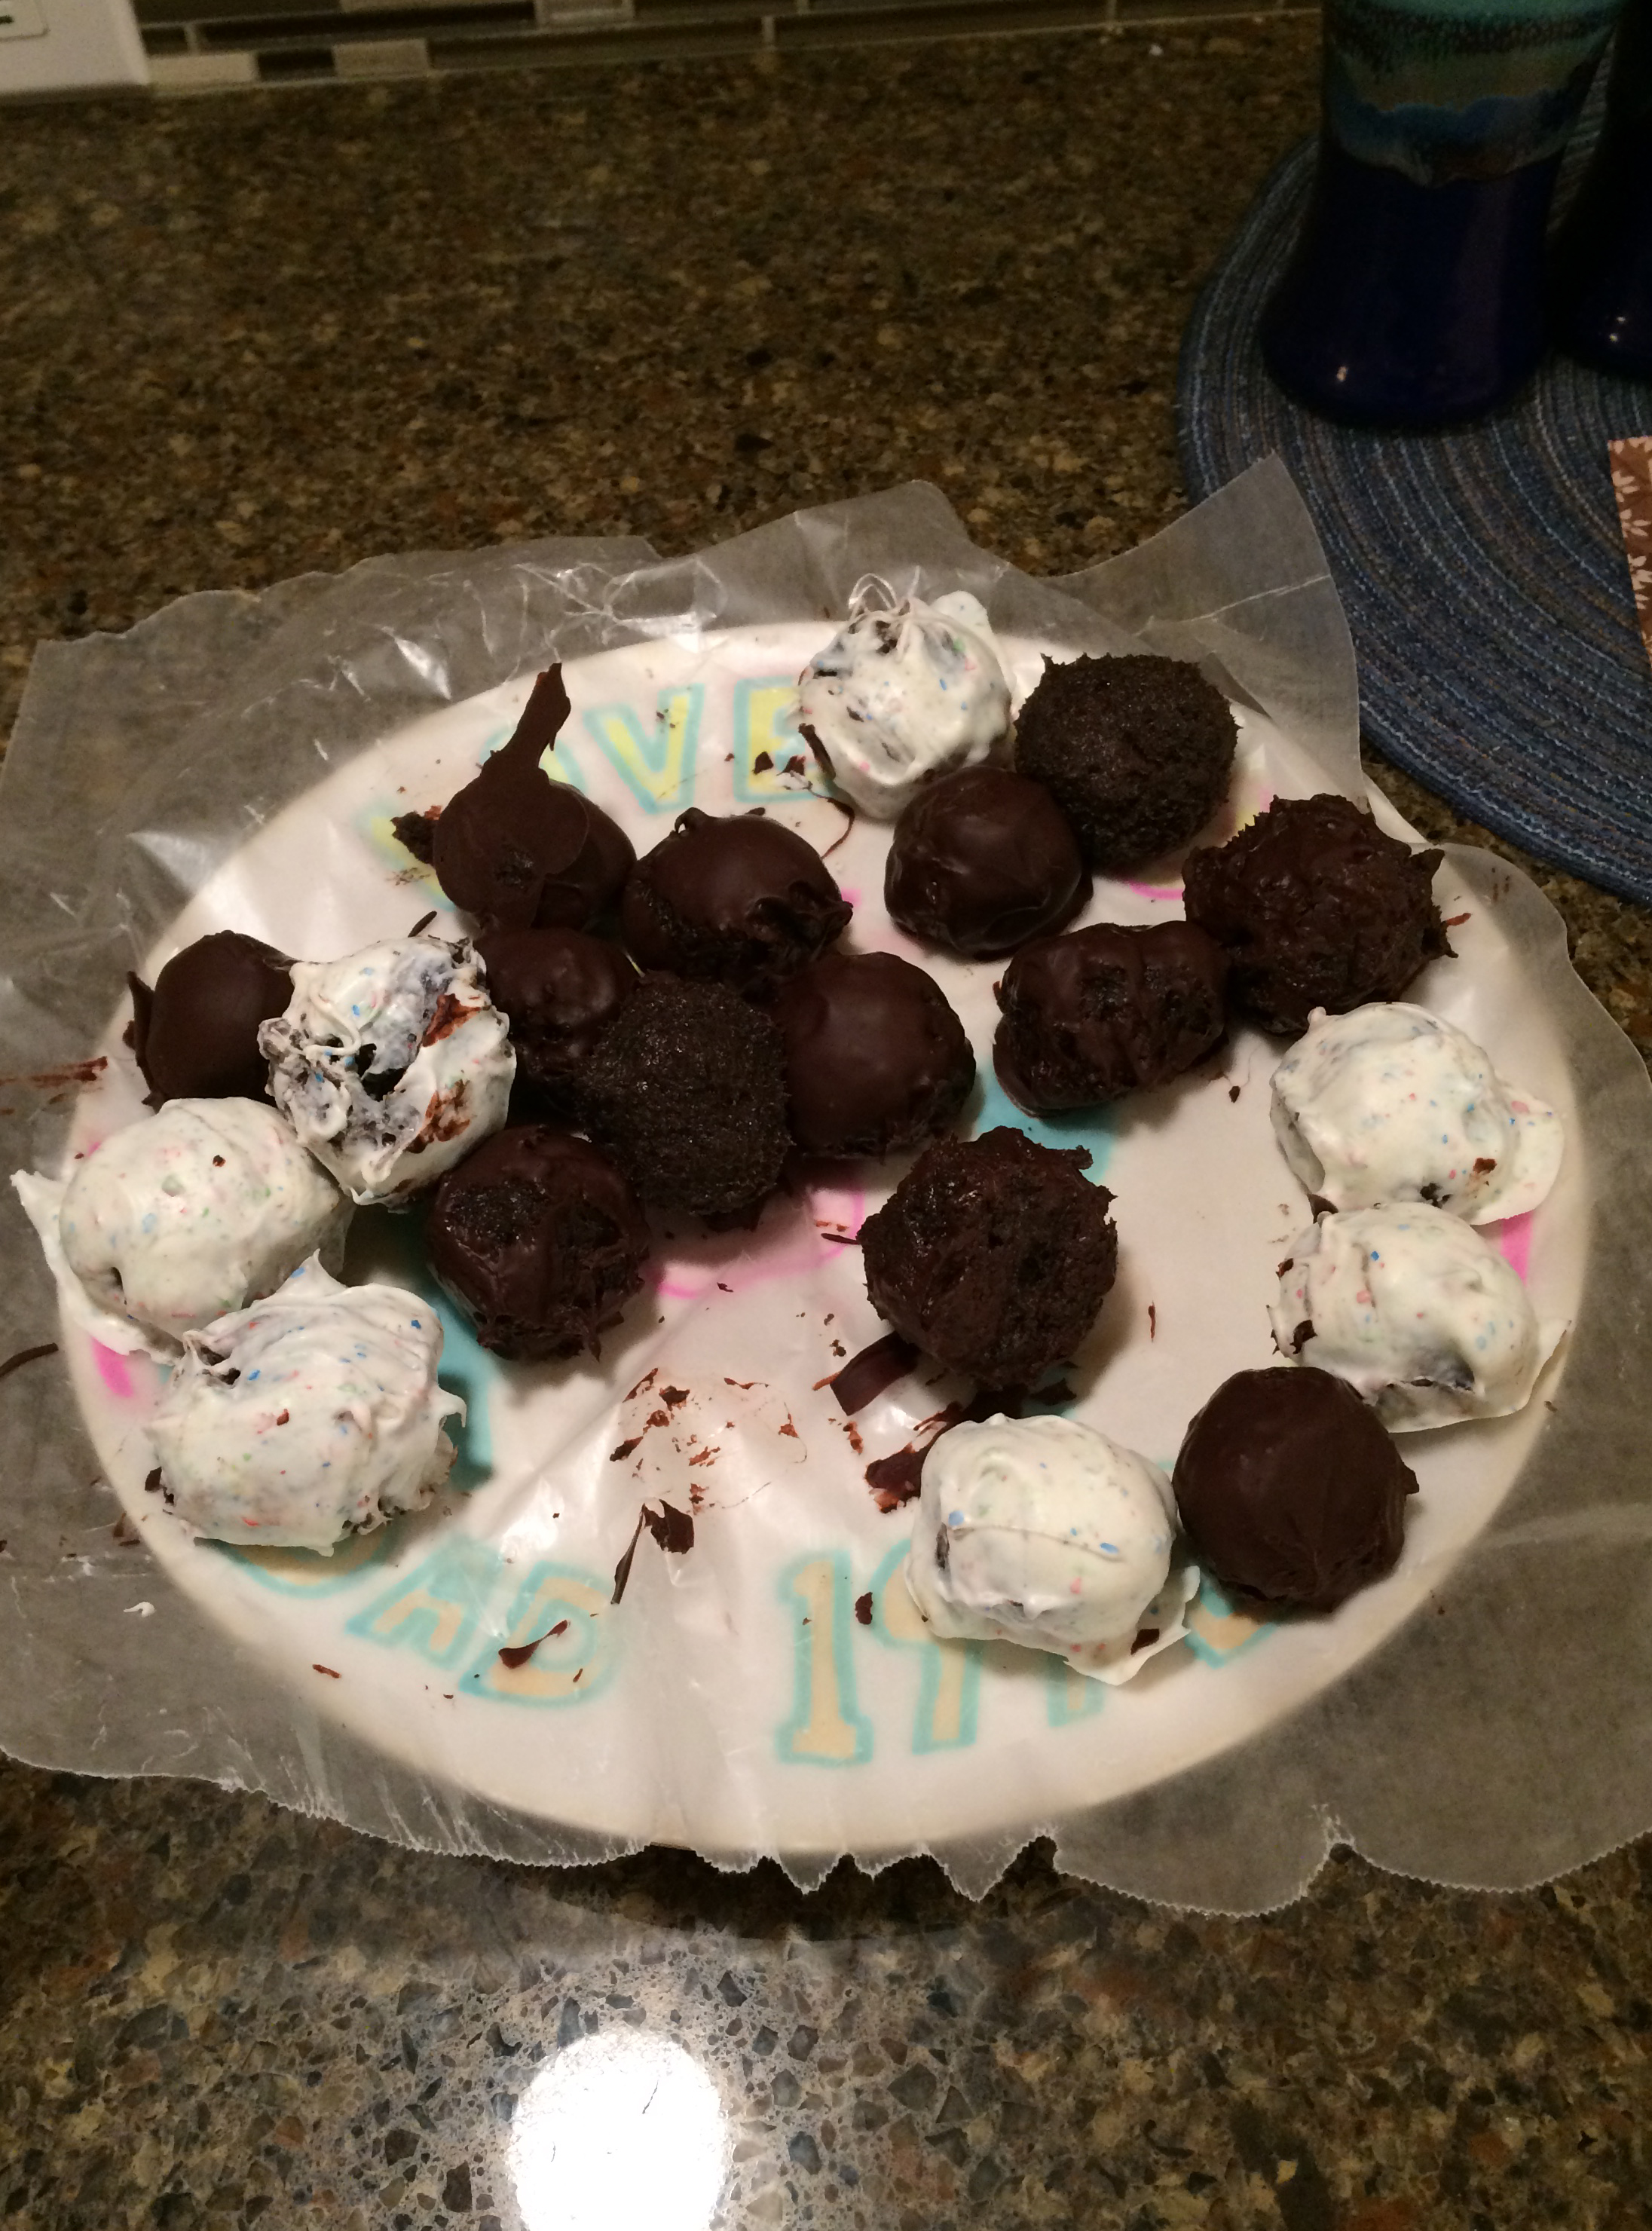 My siblings and wife combined to make these delicious Oreo truffles.